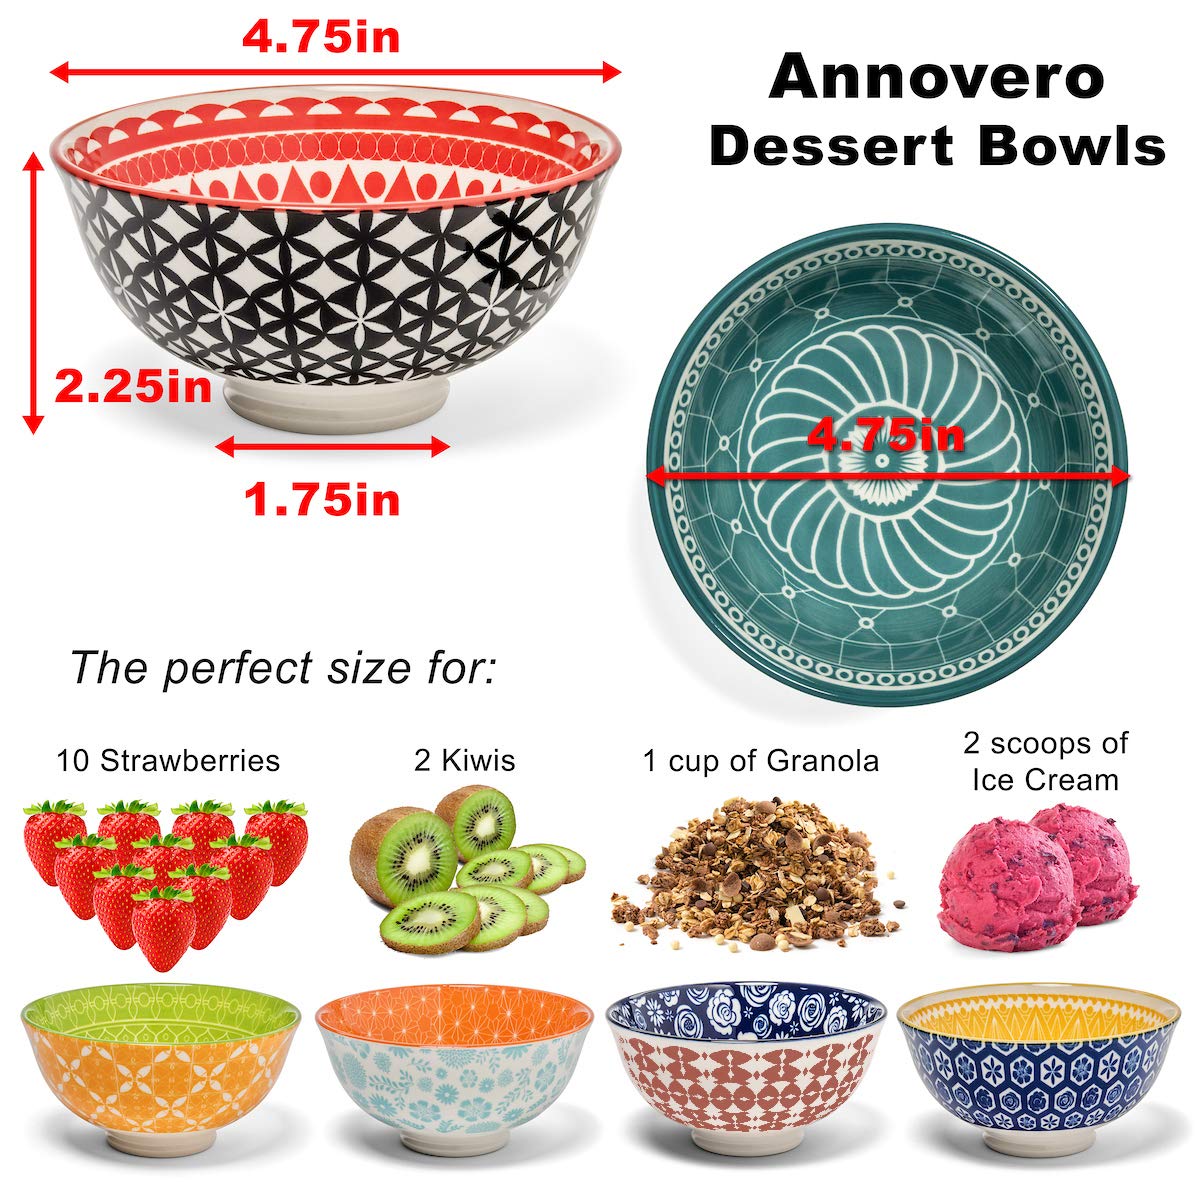 Annovero Ice Cream Bowls - for Salsa, Dessert, Rice, Charcuterie Accessories Cups, Ramekins, Small Serving Dishes for Entertaining, 4.75 Inch Diameter, 10 Fluid Ounce (1.25 Cup) Capacity, Set of 6